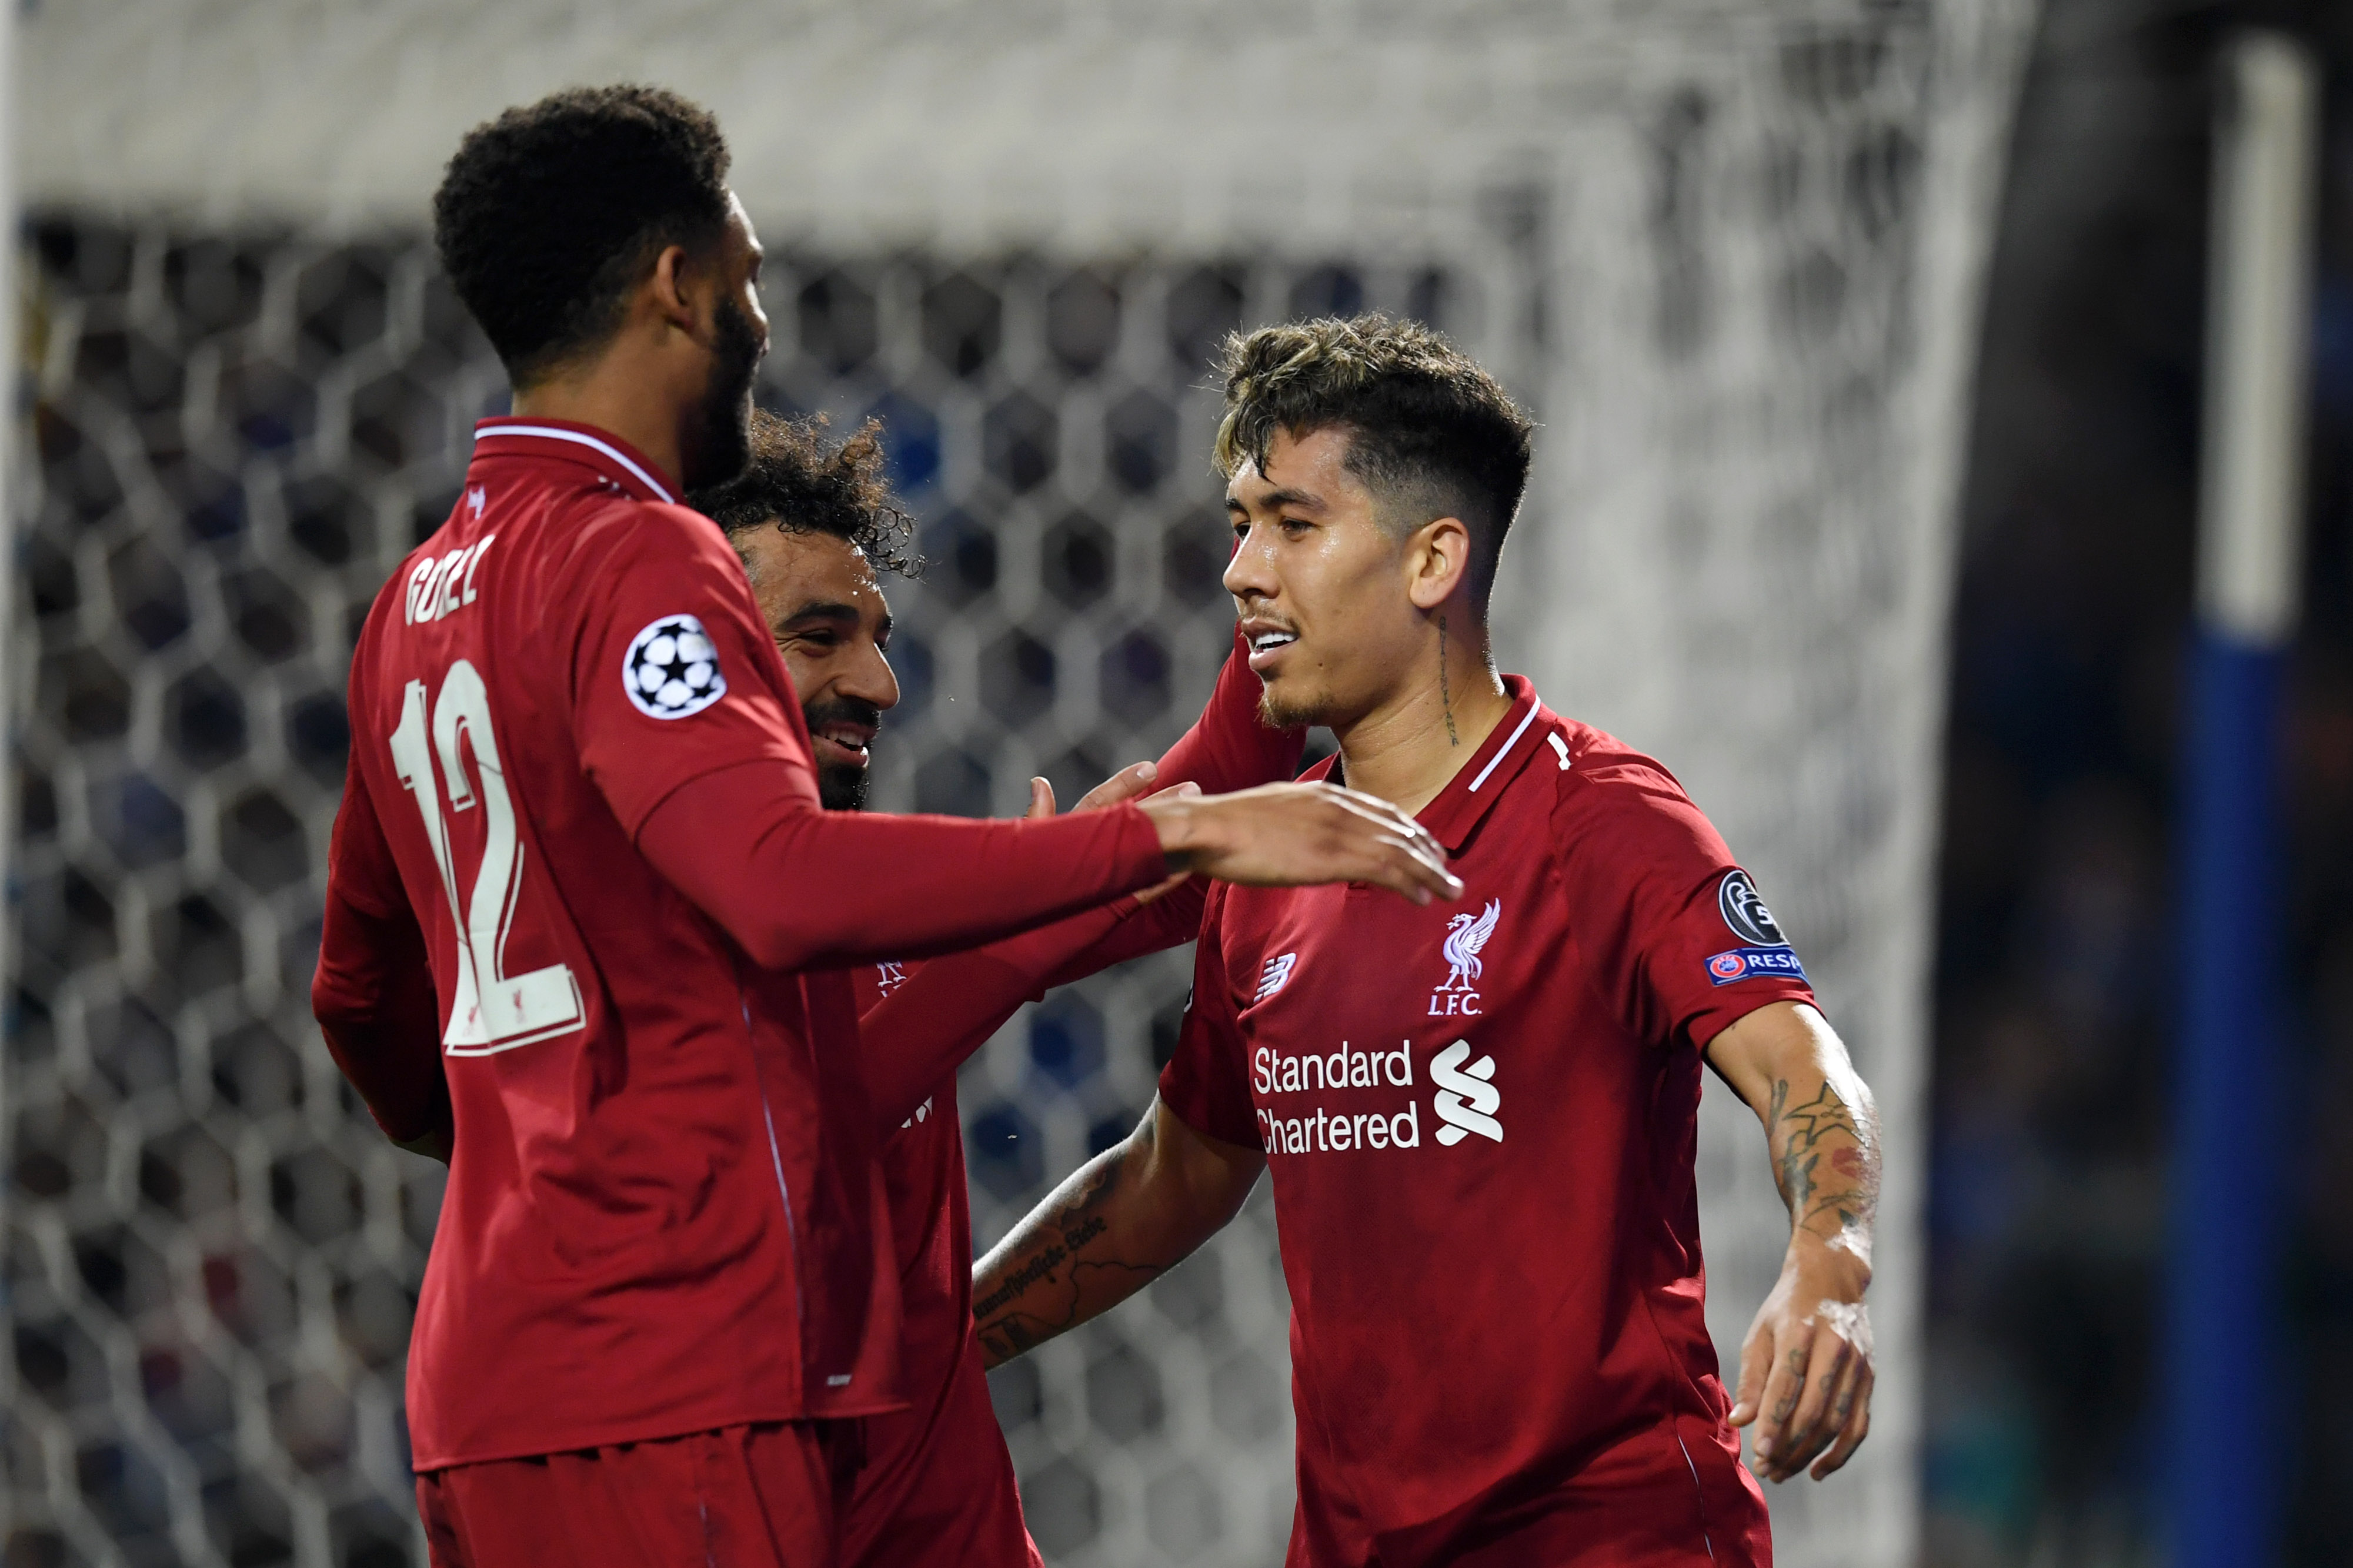 PORTO, PORTUGAL - APRIL 17:  Roberto Firmino of Liverpool celebrates with teammates Mohamed Salah and Joe Gomez after scoring his team's third goal during the UEFA Champions League Quarter Final second leg match between Porto and Liverpool at Estadio do Dragao on April 17, 2019 in Porto, Portugal. (Photo by Matthias Hangst/Getty Images)